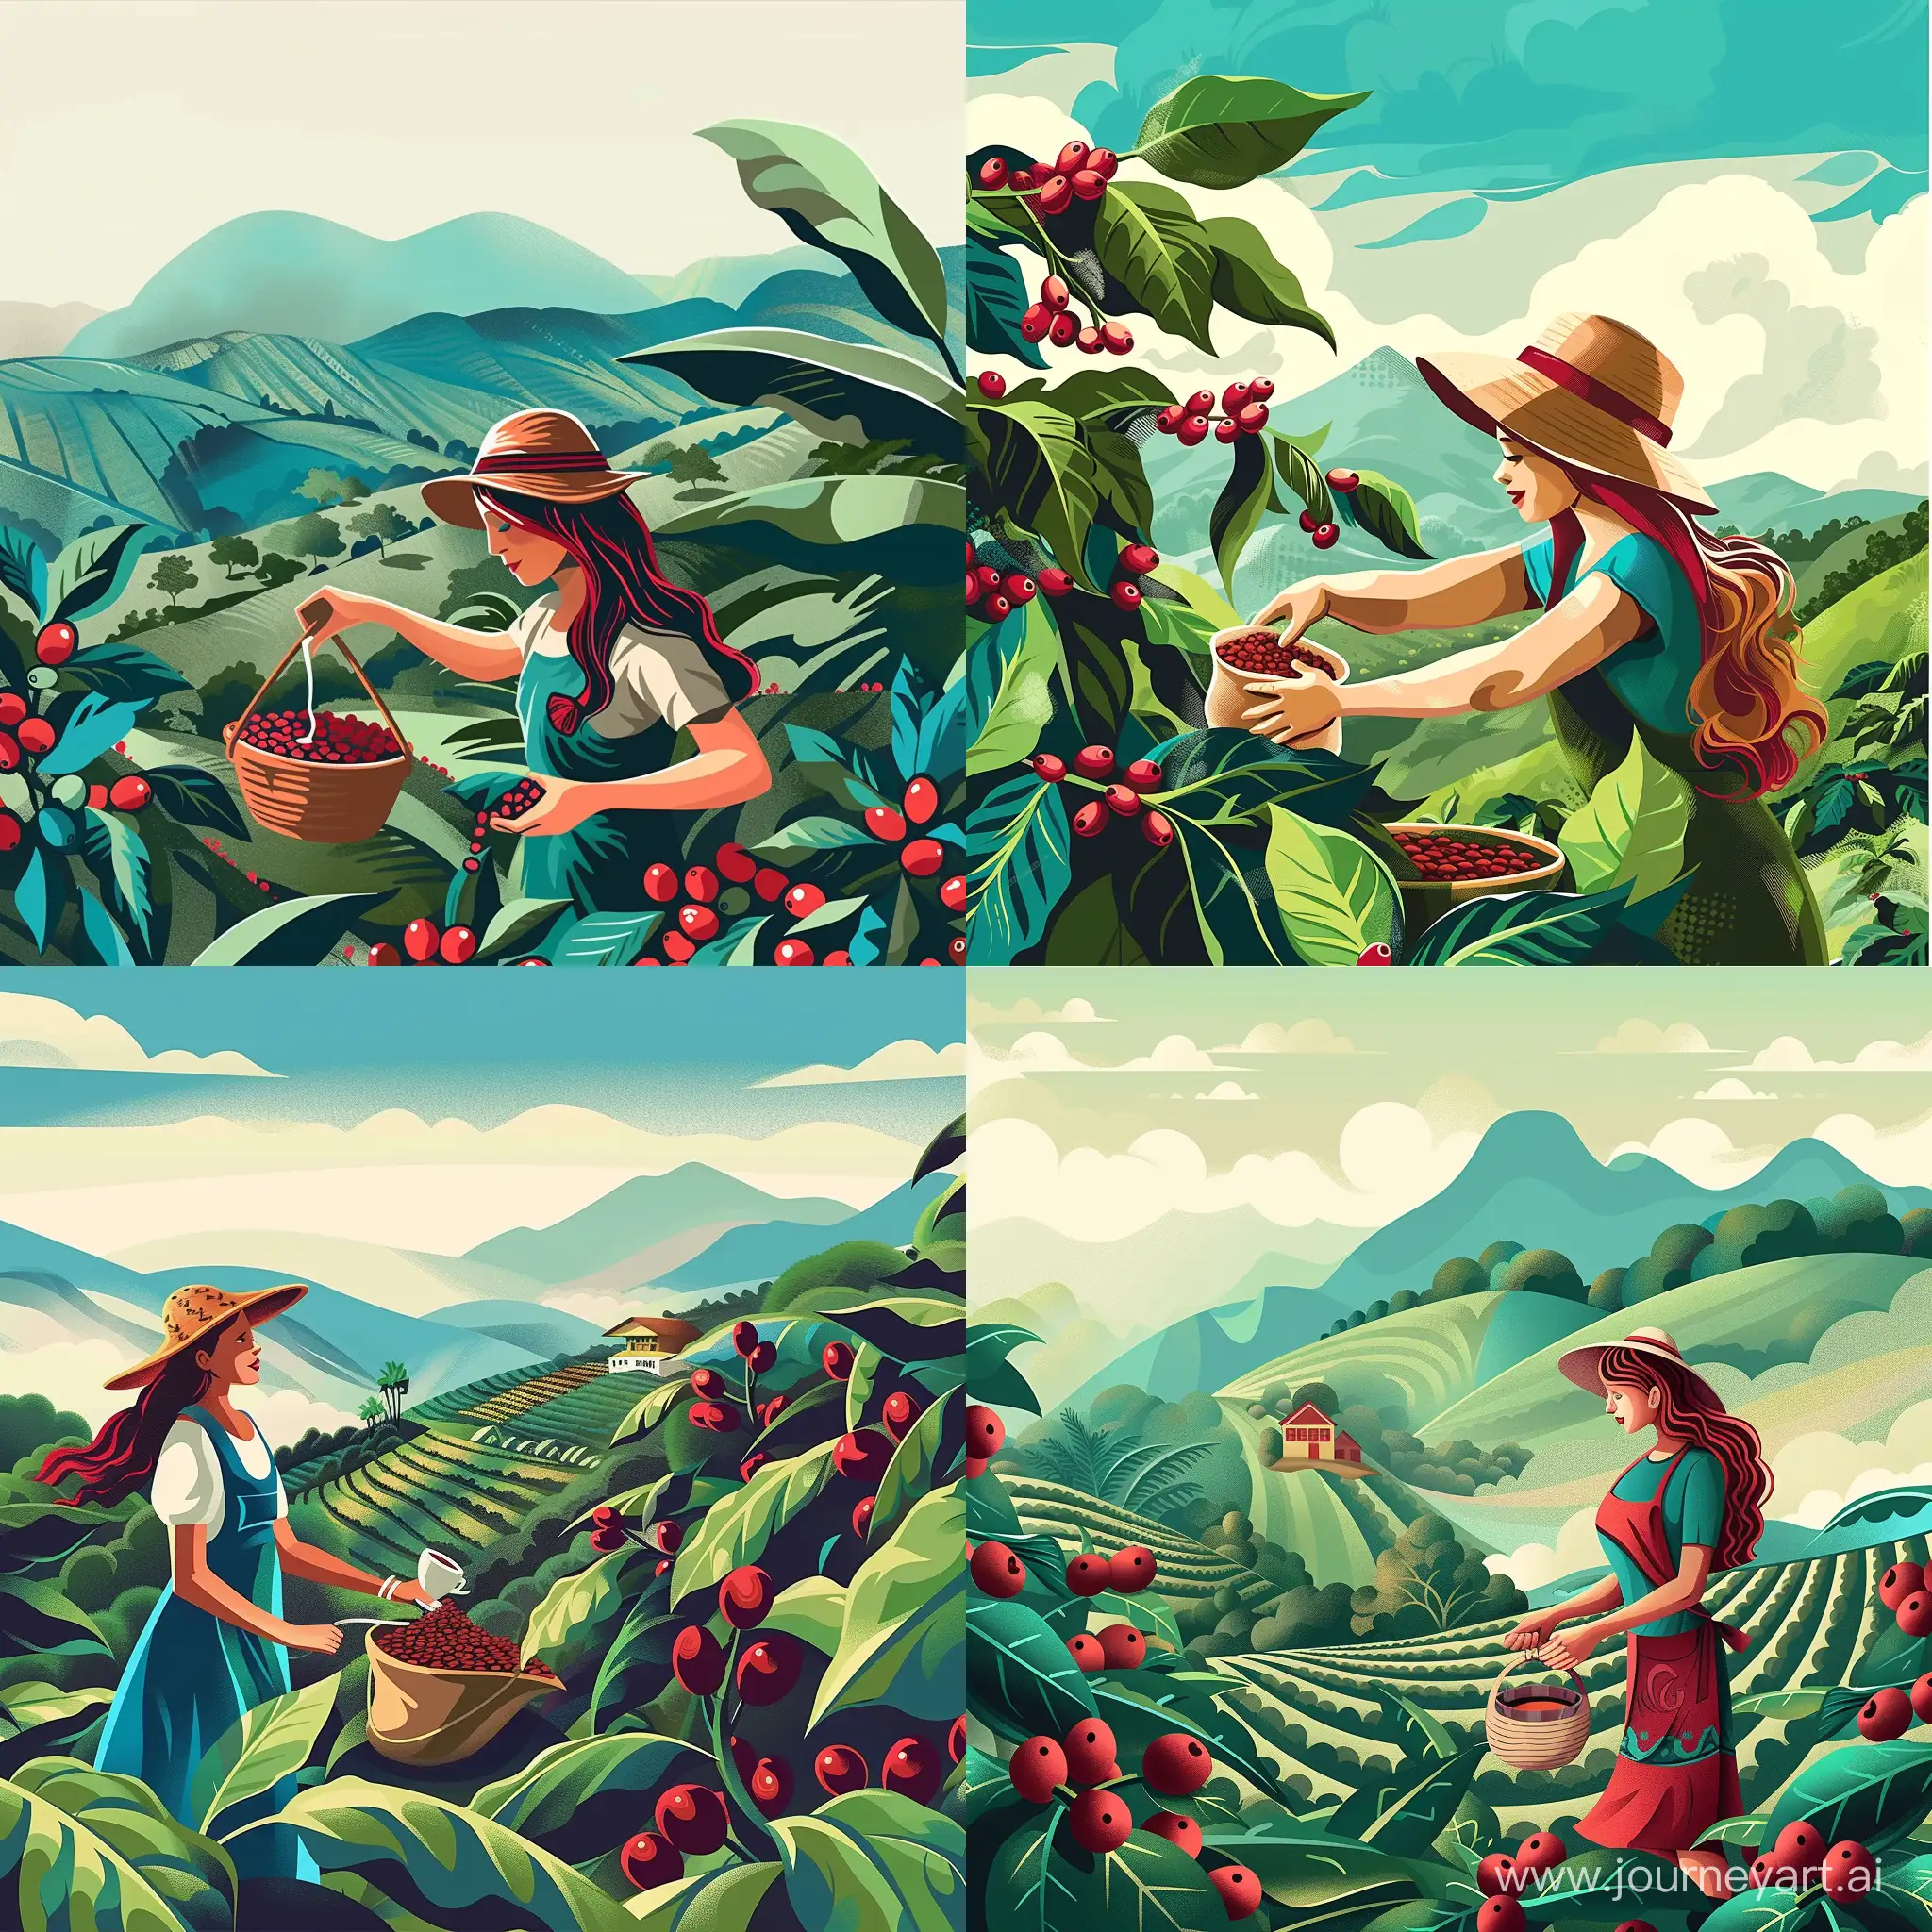 Harvesting-Coffee-in-Brazilian-Plantations-Serene-Illustration-of-a-Girl-in-Action